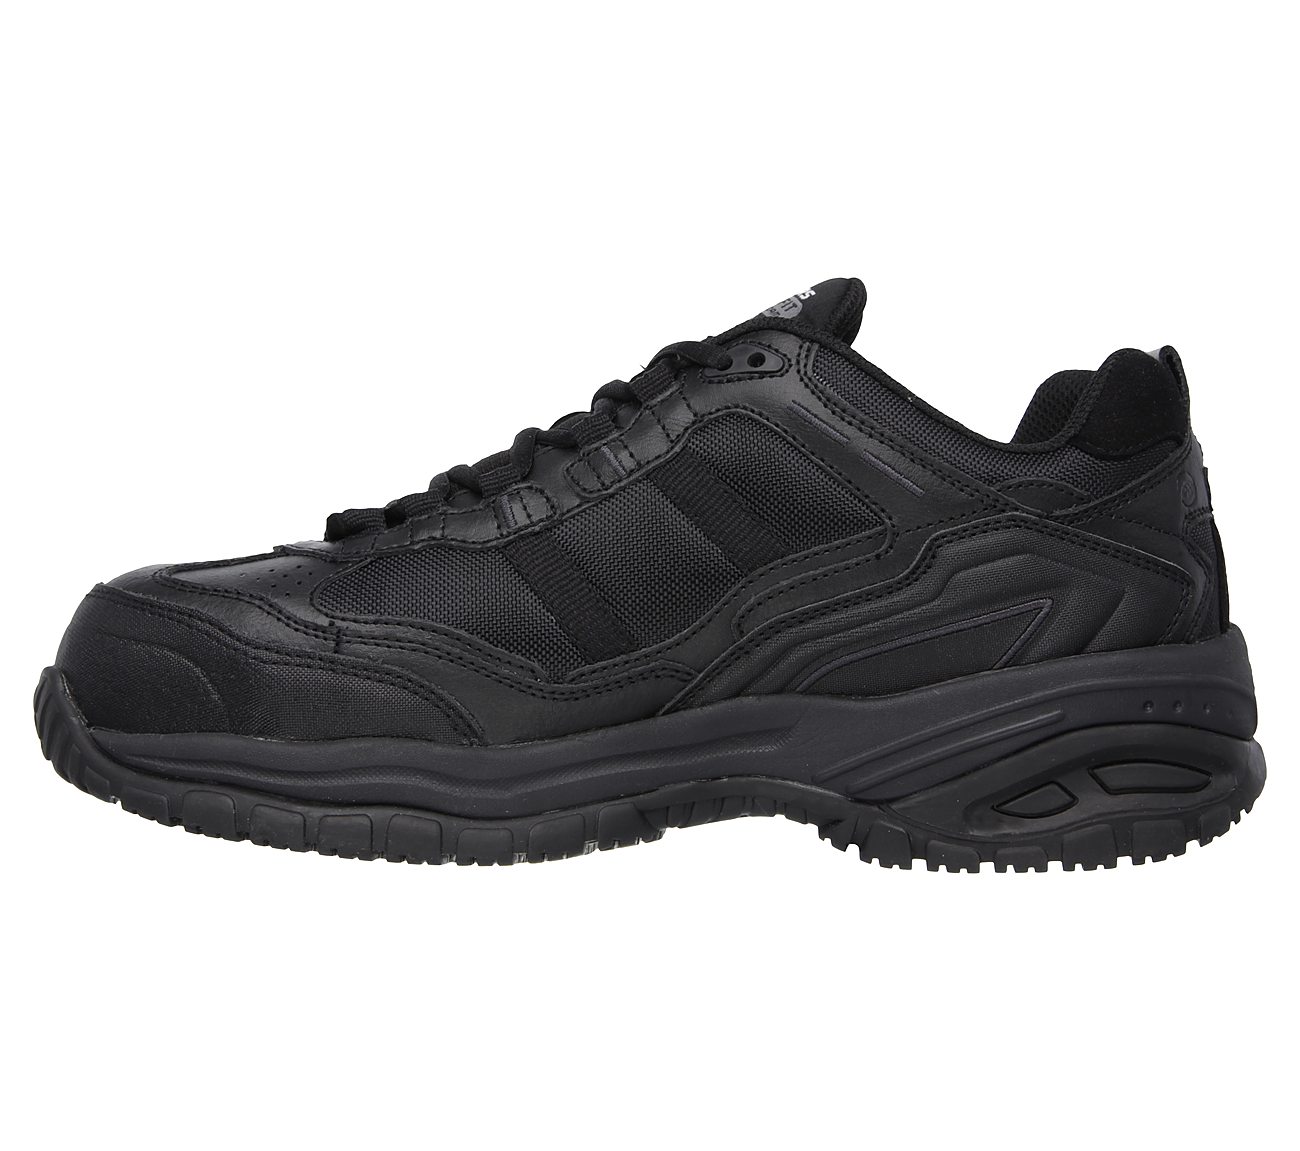 Grinnell Comp Toe SKECHERS Work Shoes